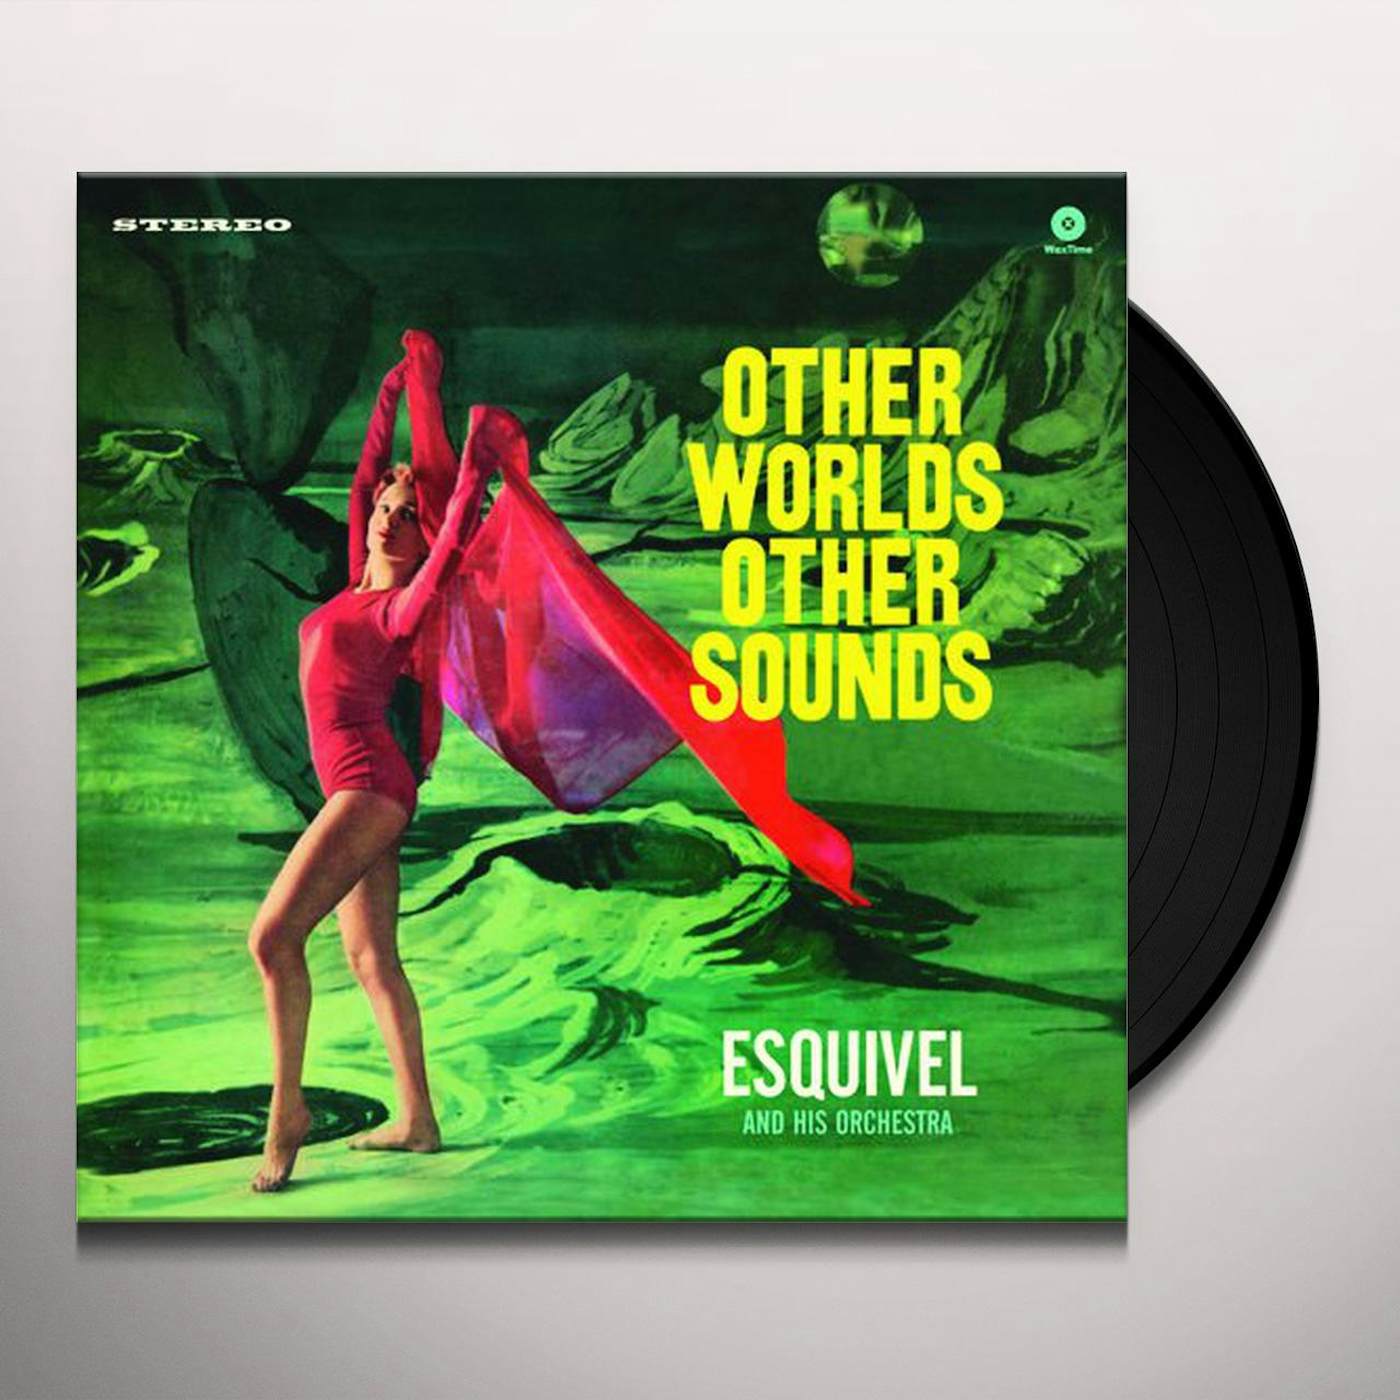 Esquivel & His Orchestra OTHER WORLDS OTHER SOUNDS (BONUS TRACK) Vinyl Record - 180 Gram Pressing